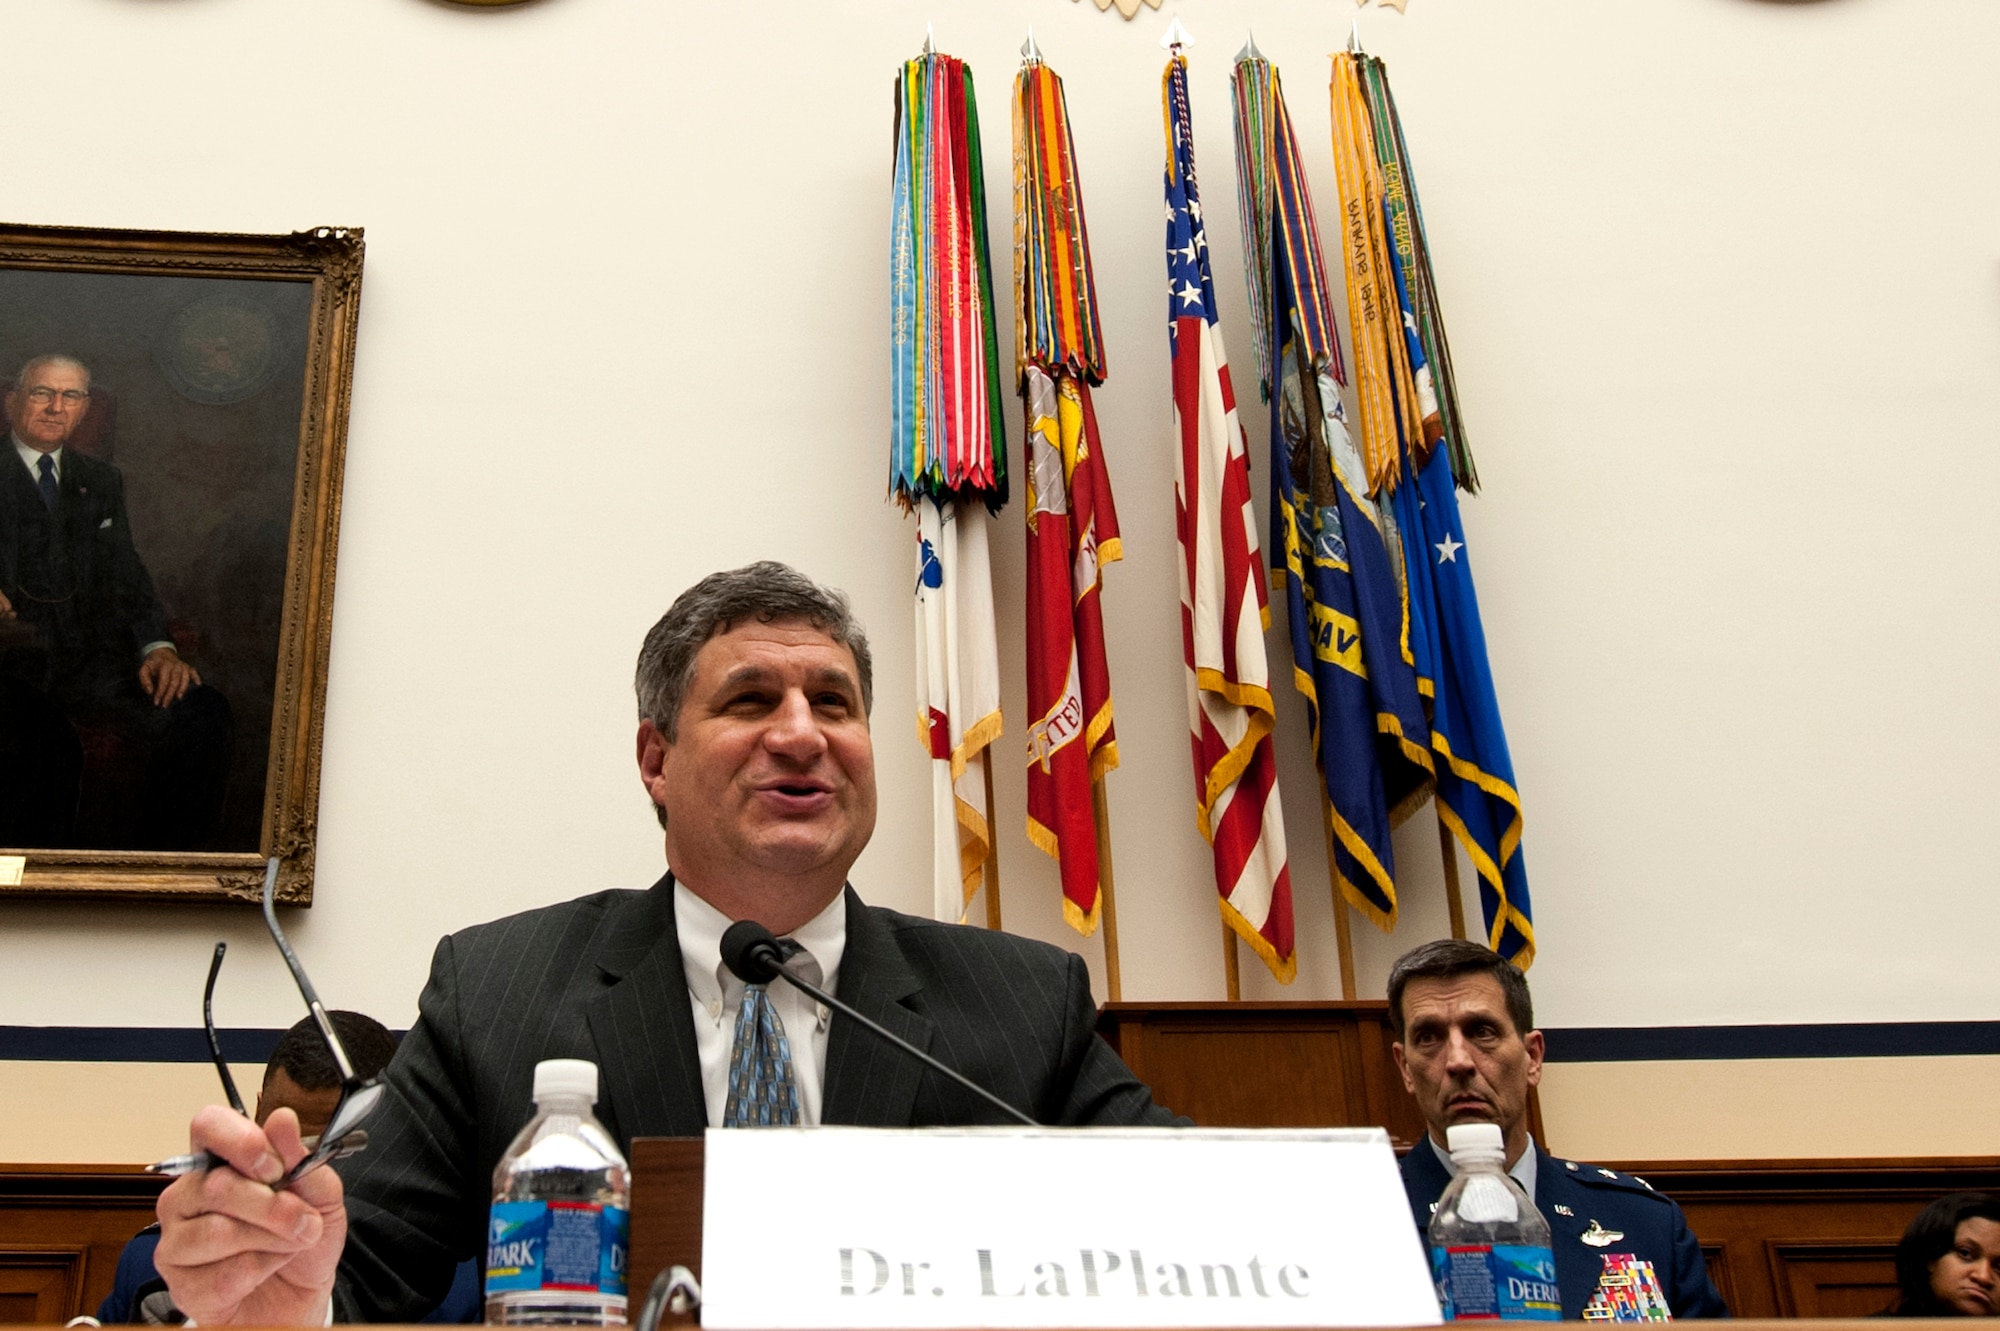 Dr. William LaPlante takes questions April 2, 2014, during his testimony to the House Armed Services Committee’s subcommittee on seapower and projection forces in Washington, D.C. LePlante is the assistant secretary of the Air Force for acquisition. (U.S. Air Force photo/Staff Sgt. Carlin Leslie)





